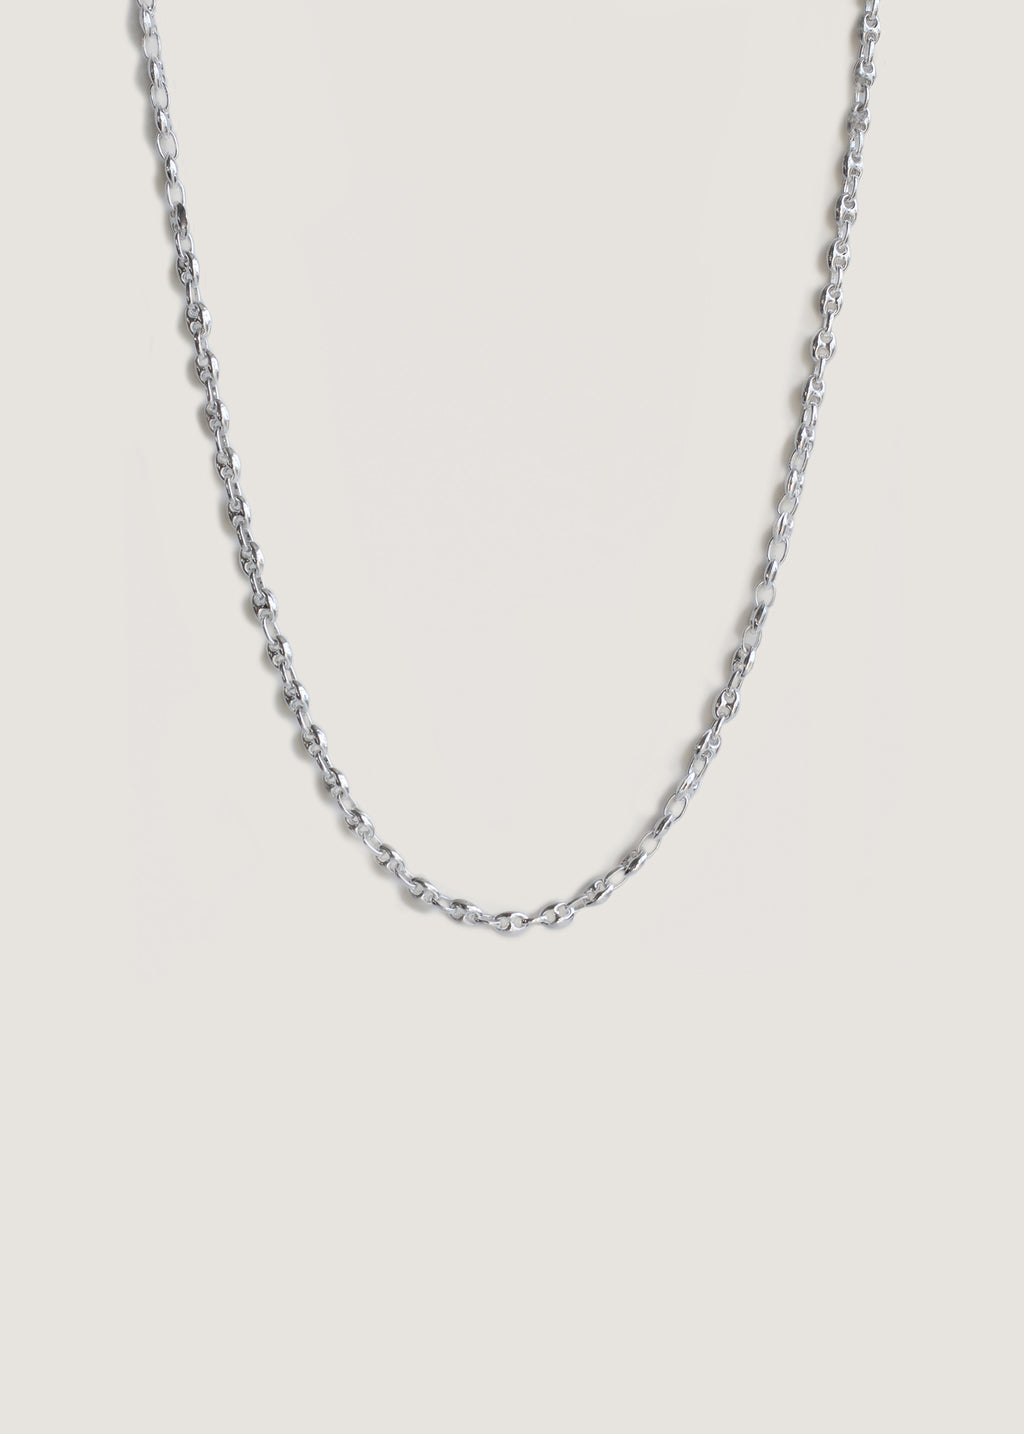 alt="Petite Puffed Mariner Chain Necklace"